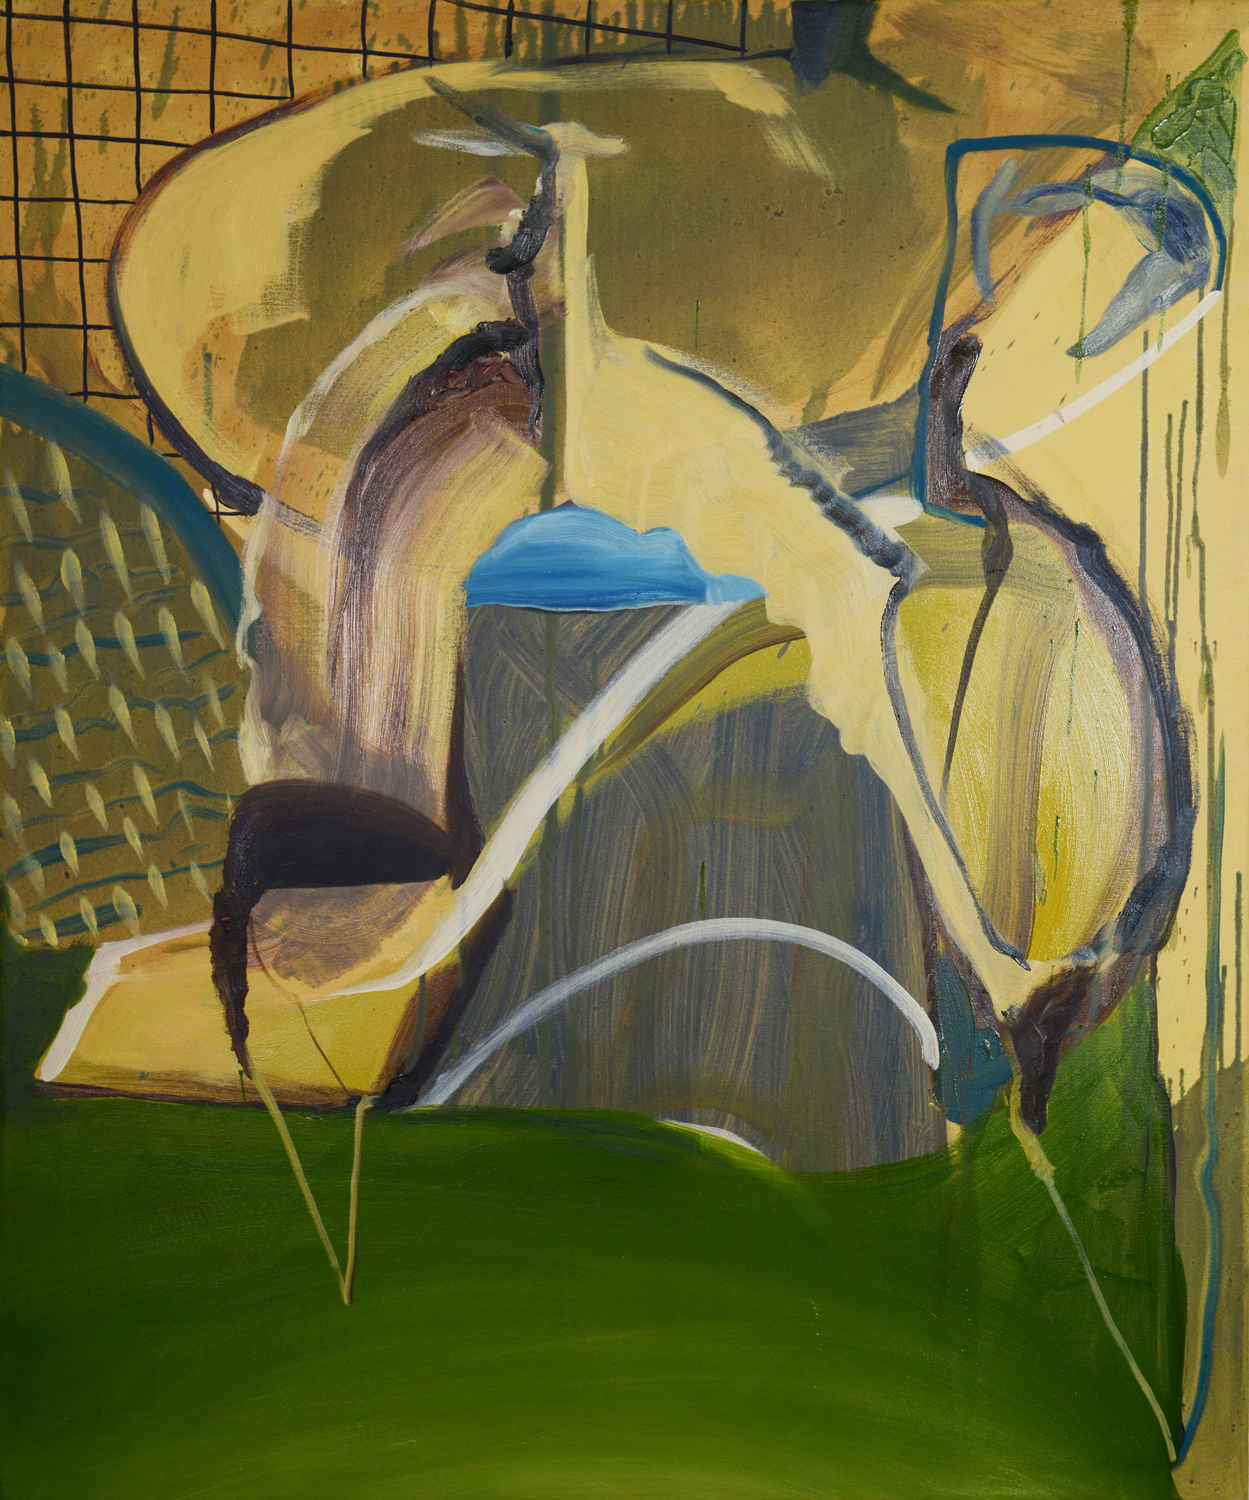 Slouch, 2013, Oil on canvas, 90 x 75 cm 